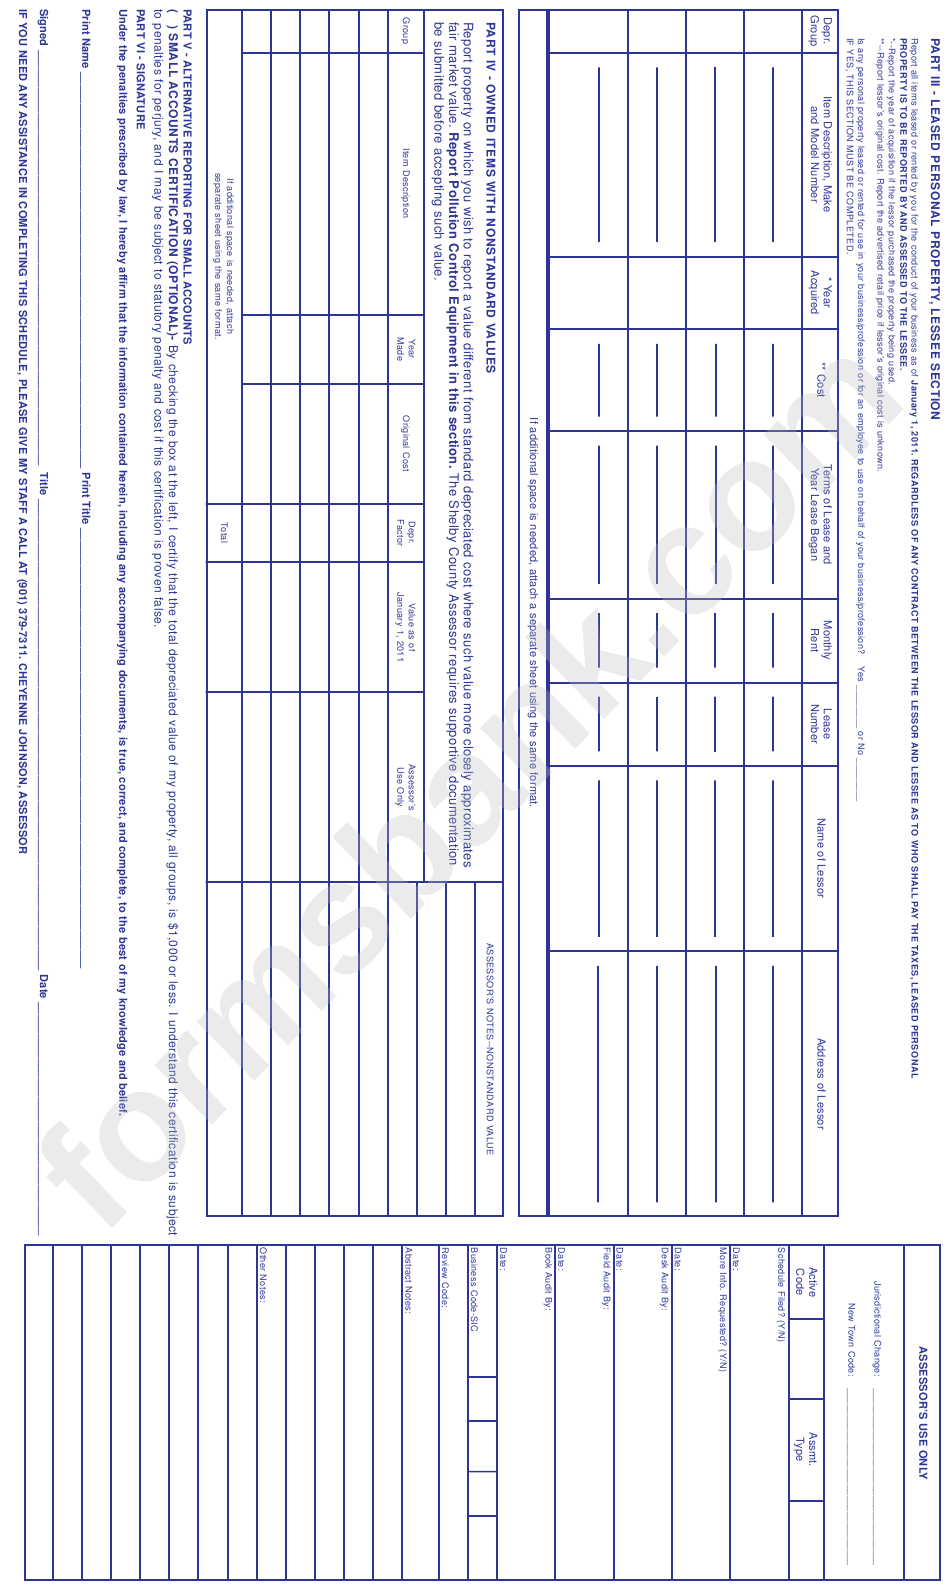 Tangible Personal Property Schedule - Shelby County - 2011